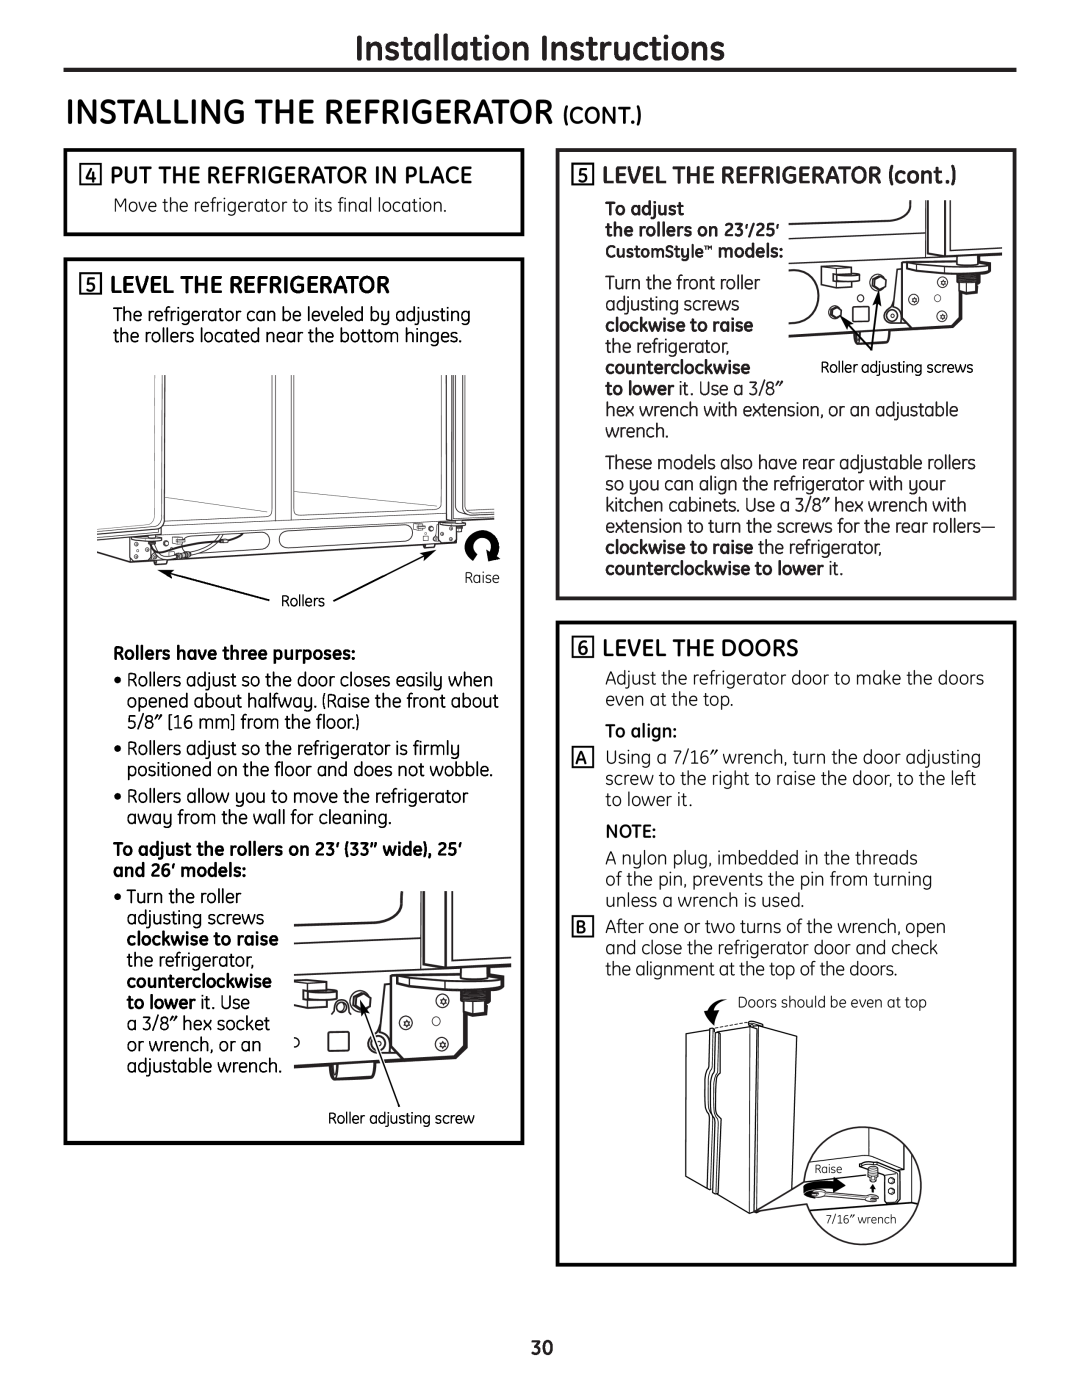 GE 25 Installation Instructions INSTALLING THE REFRIGERATOR CONT, Put The Refrigerator In Place, Level The Refrigerator 